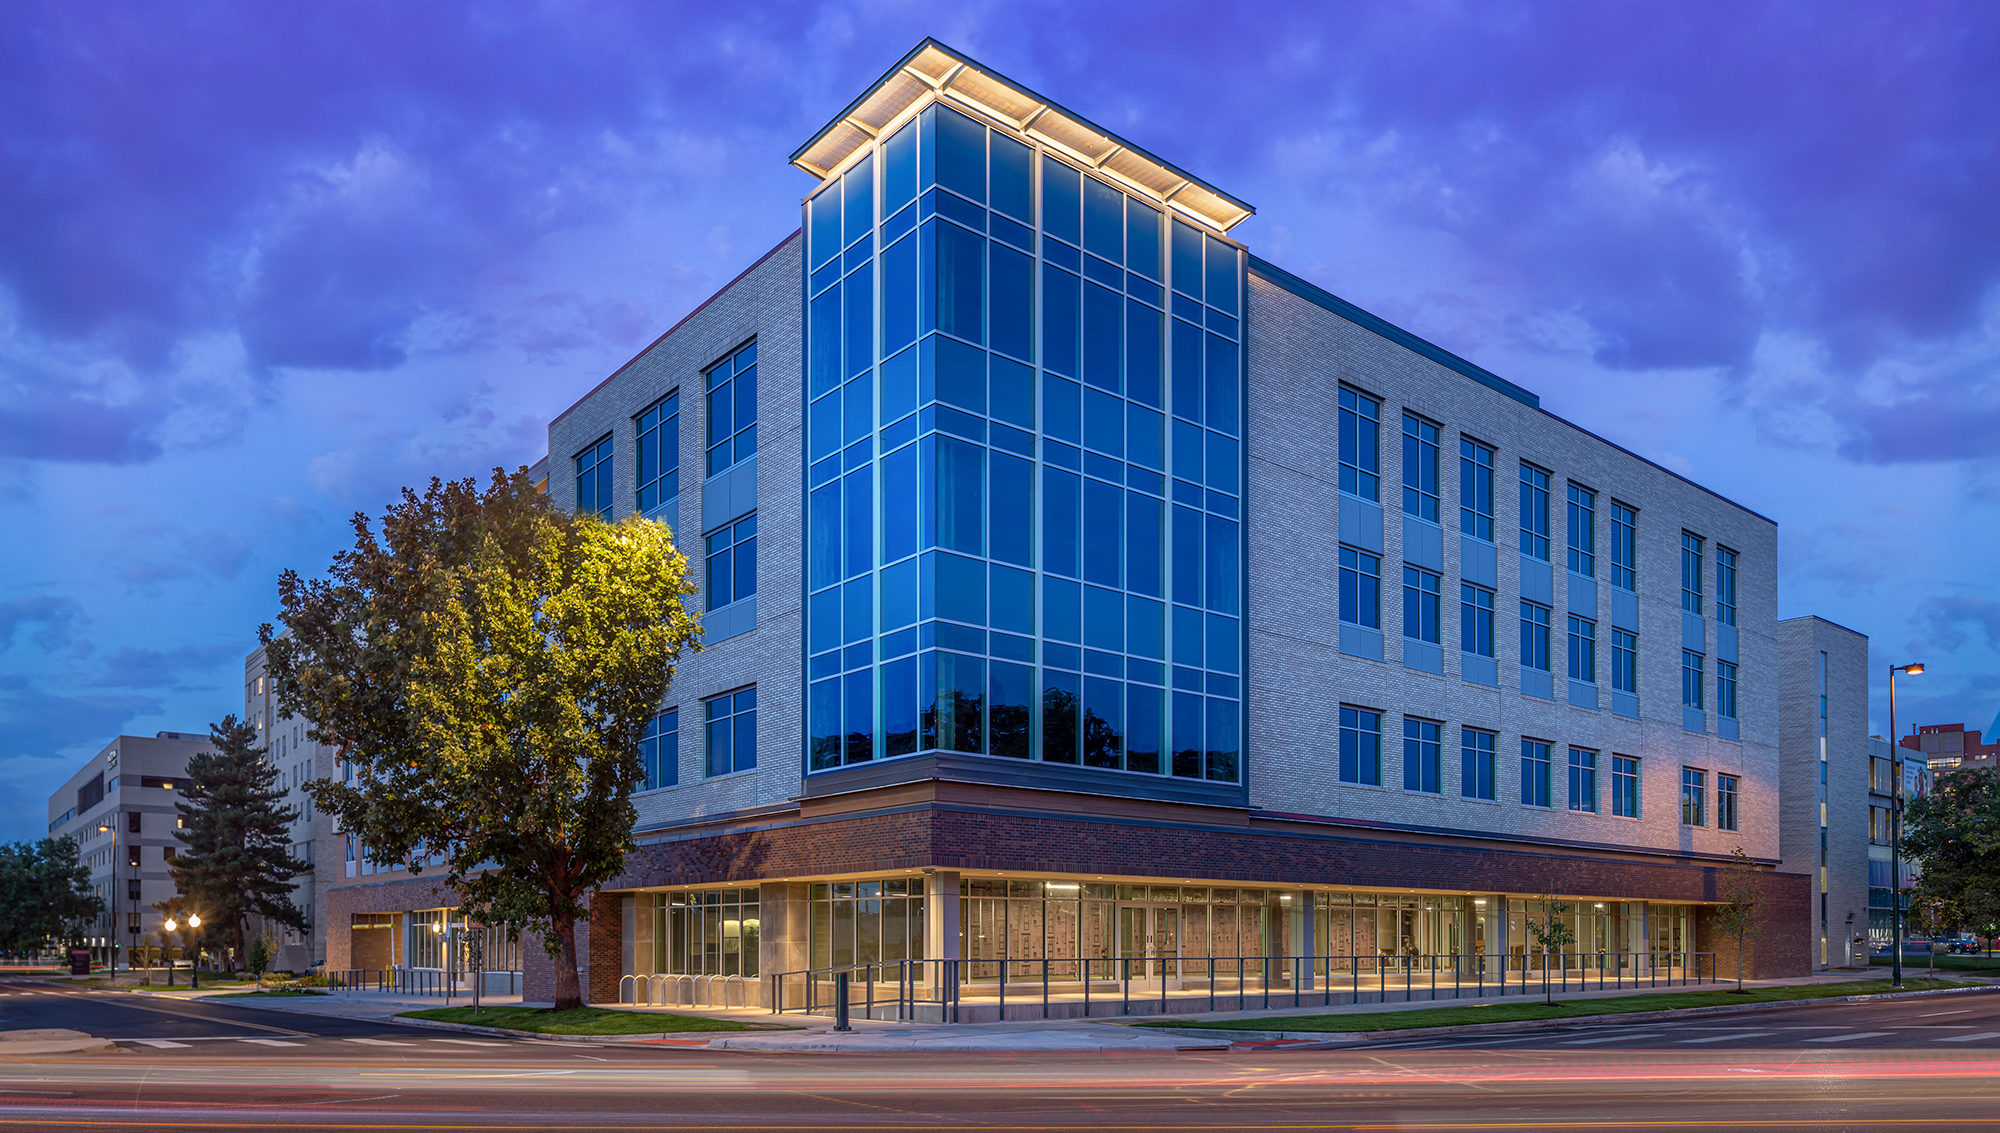 News Release Scl Health Heart And Vascular Institute Leases Full Floor